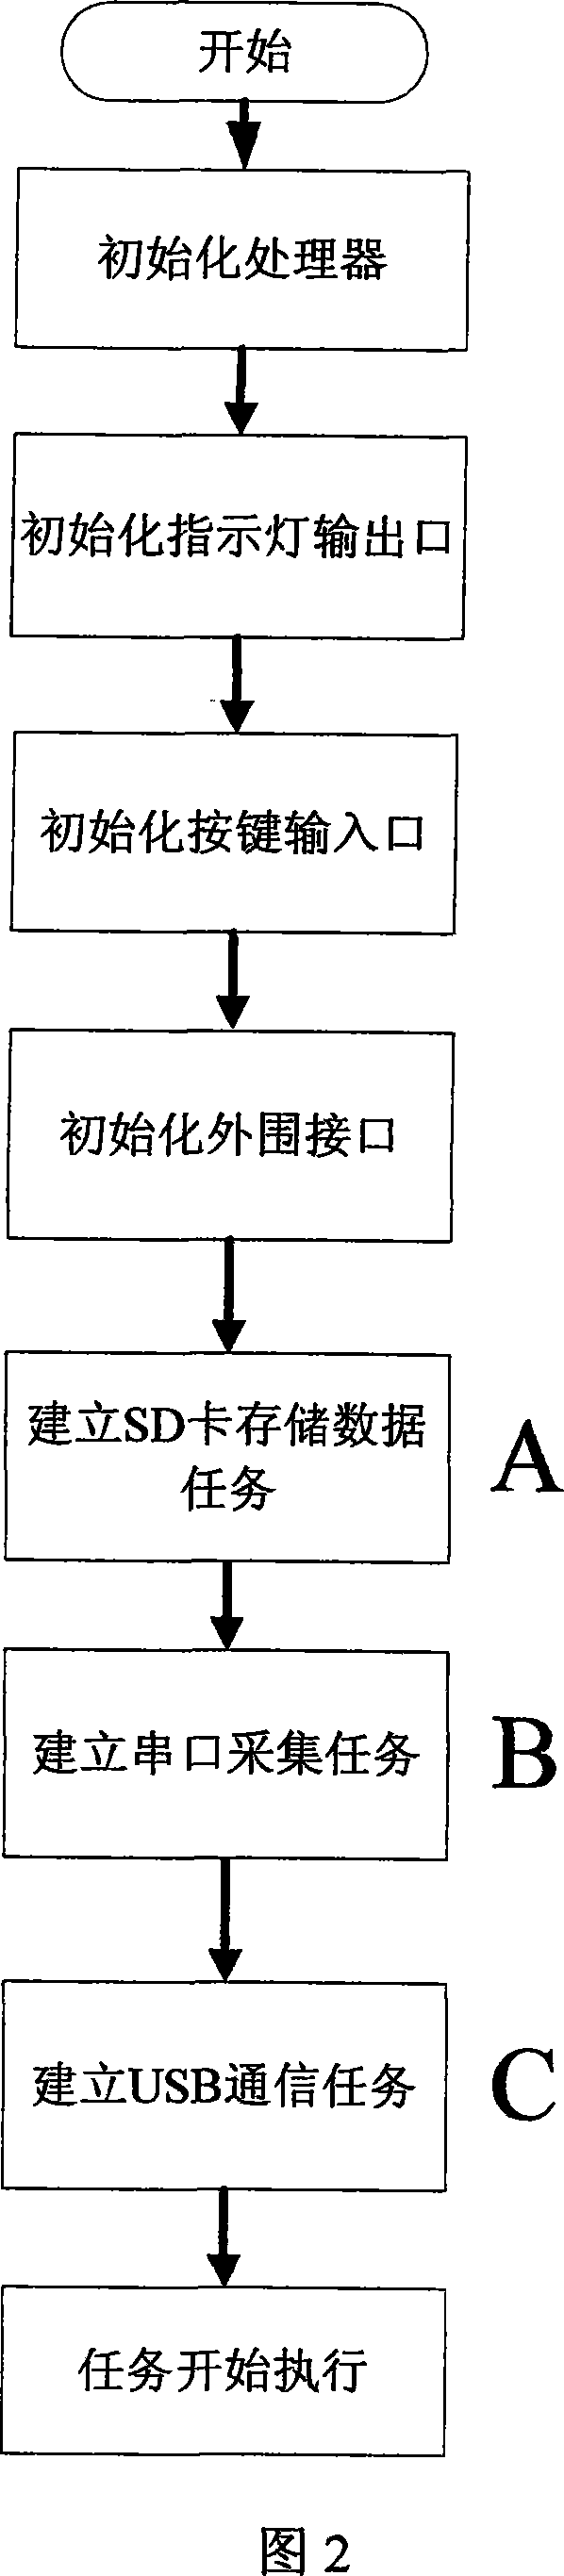 Portable serial number recorder and implementation method